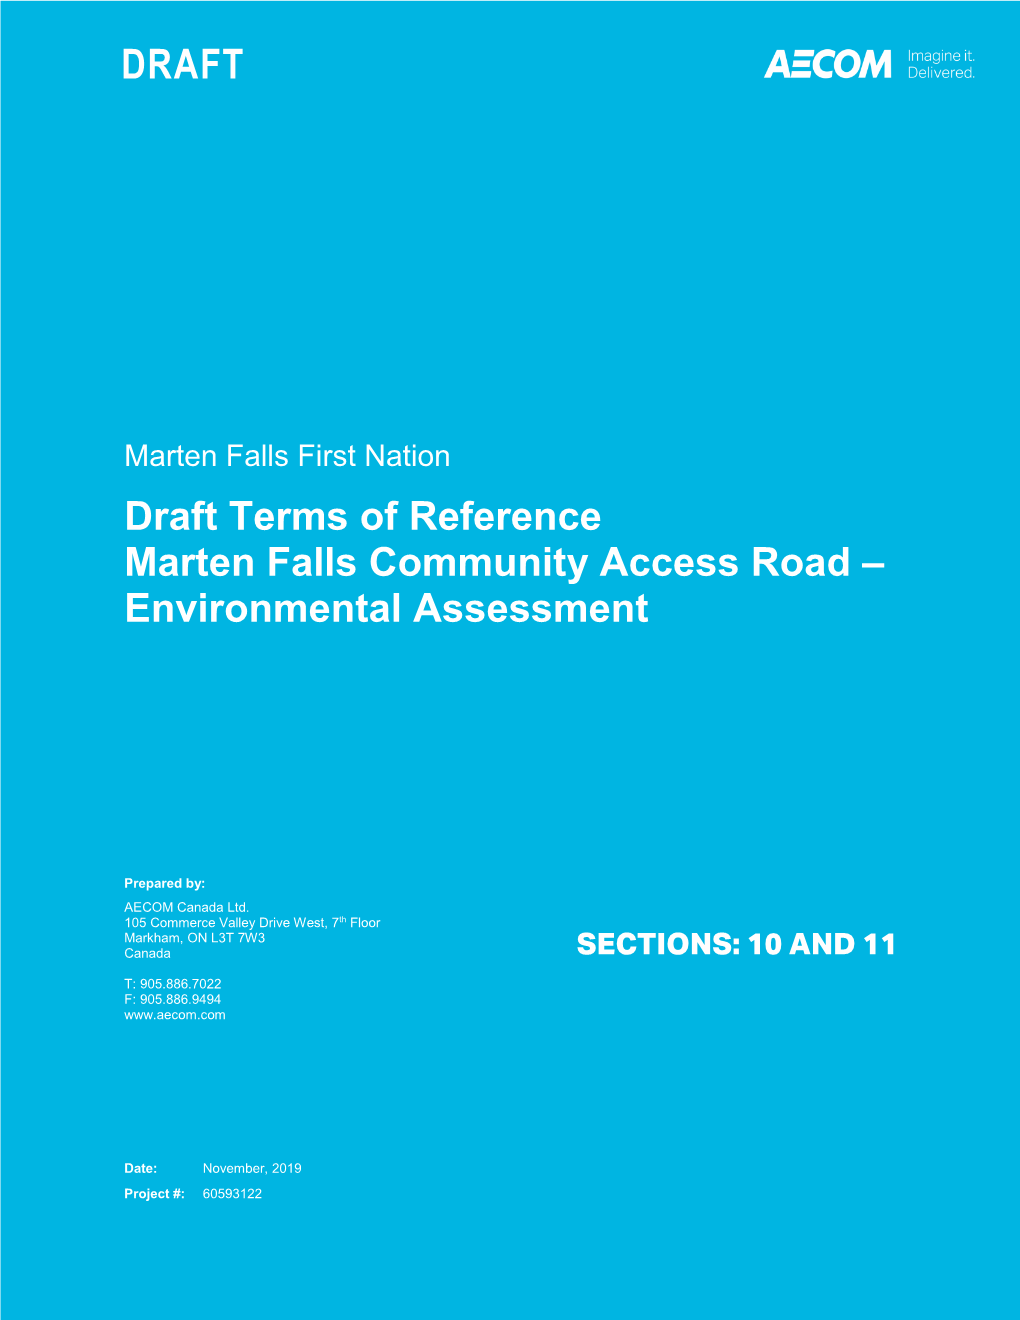 Draft Terms of Reference Sections 10-11